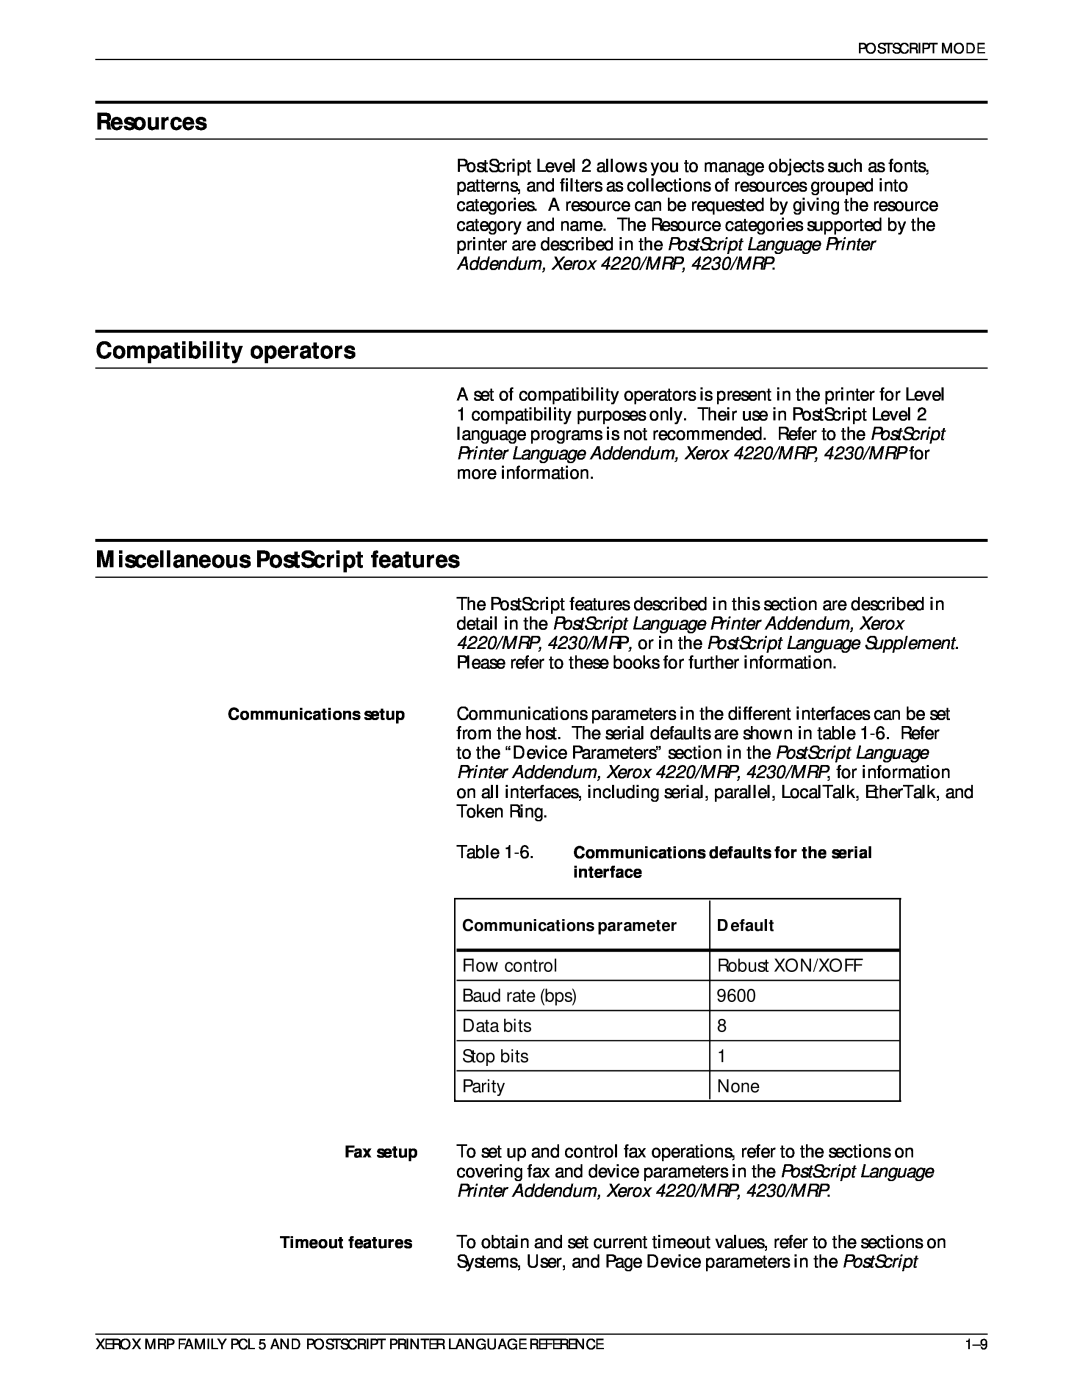 Xerox 4215/MRP Resources, Compatibility operators, Miscellaneous PostScript features, interface, Communications parameter 